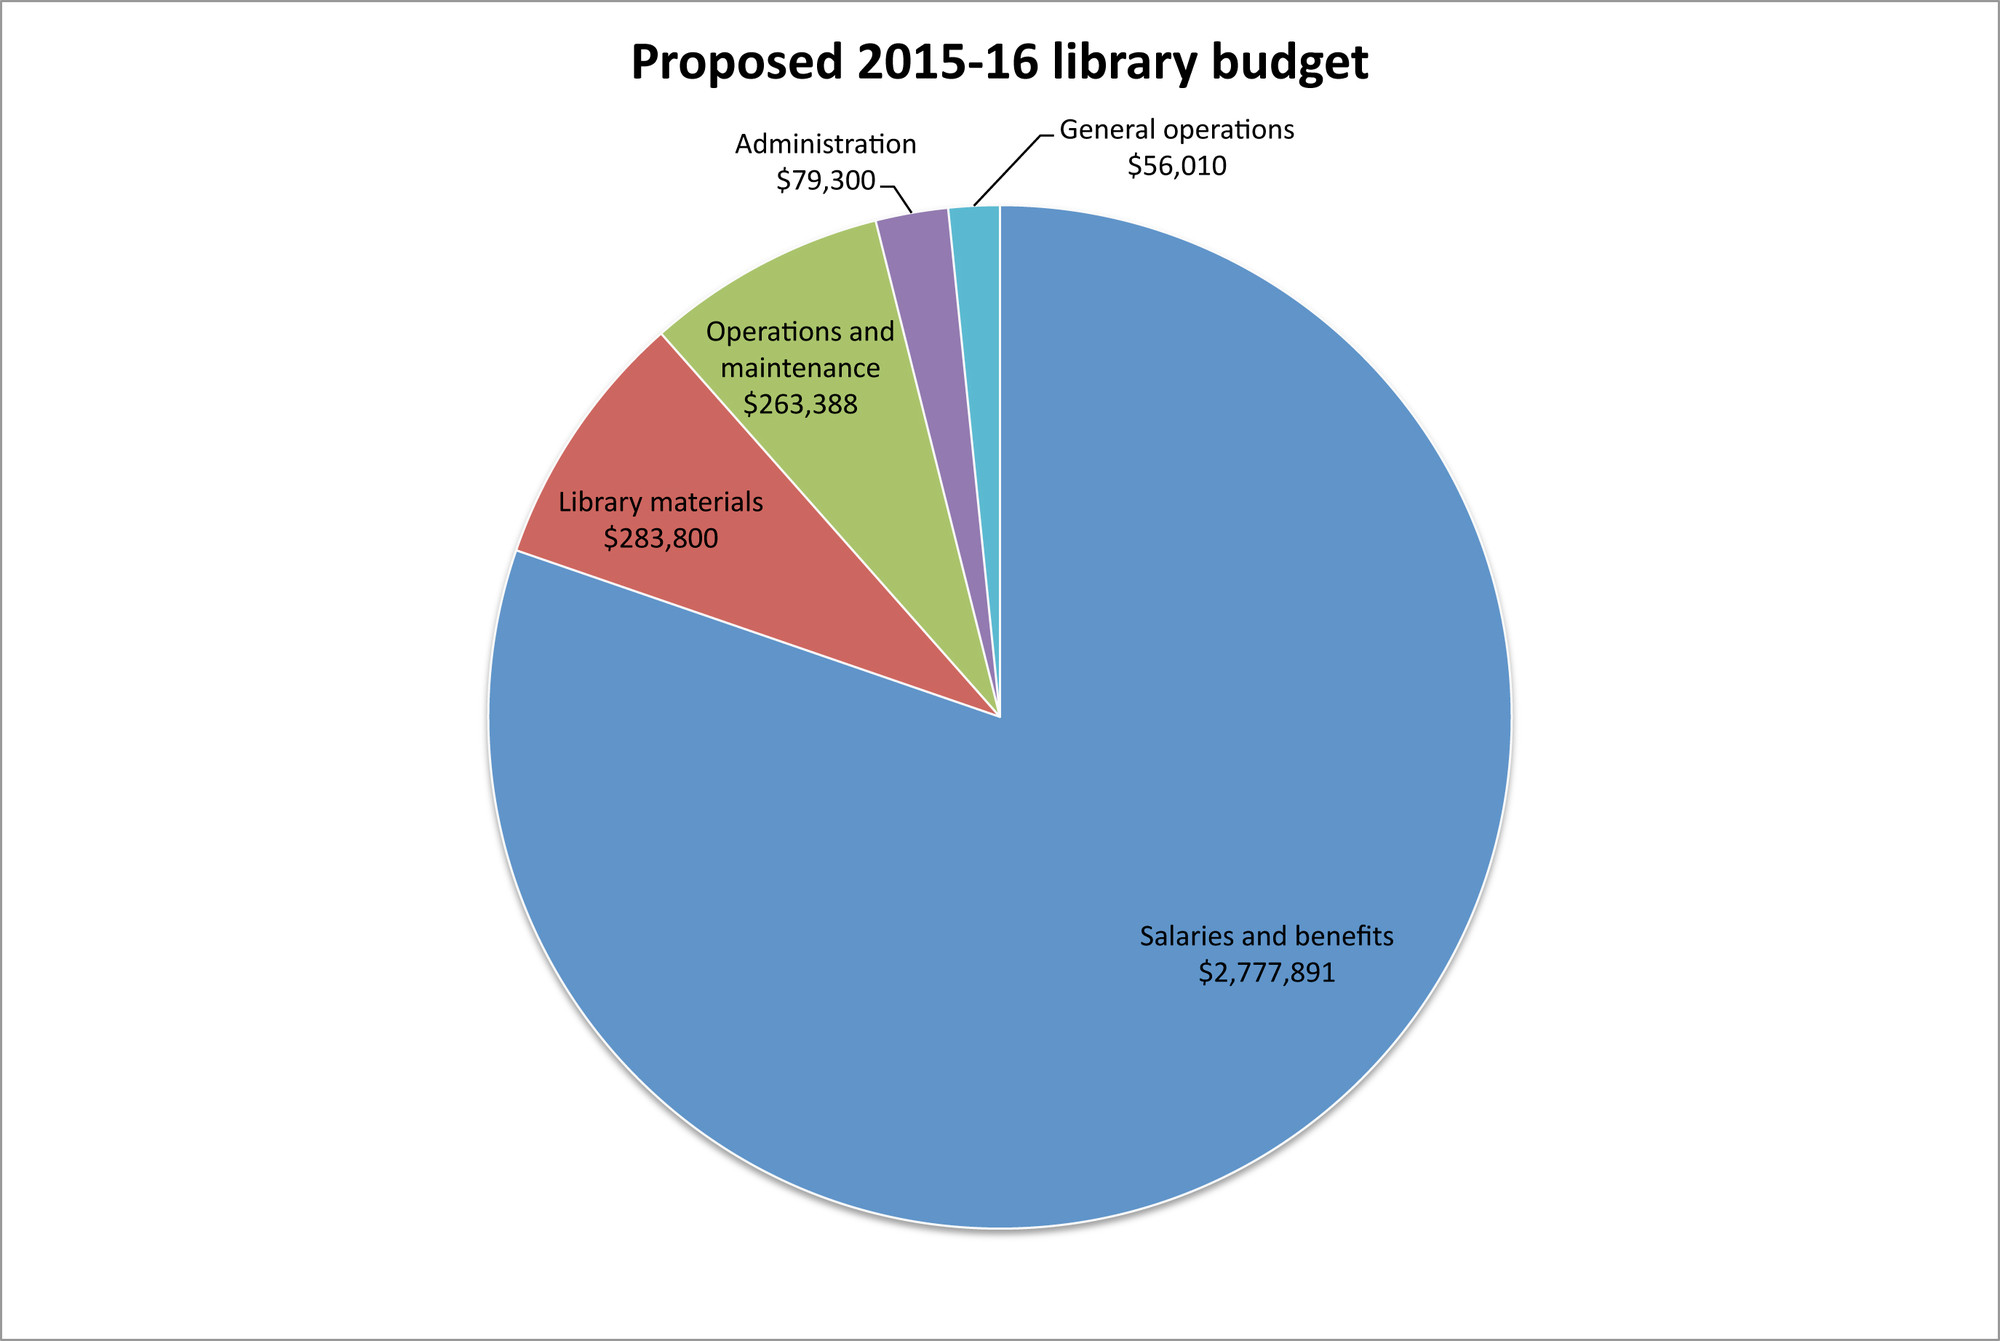 Salaries and Benefits make up the largest portion of the library’s proposed $3.3 million budget.